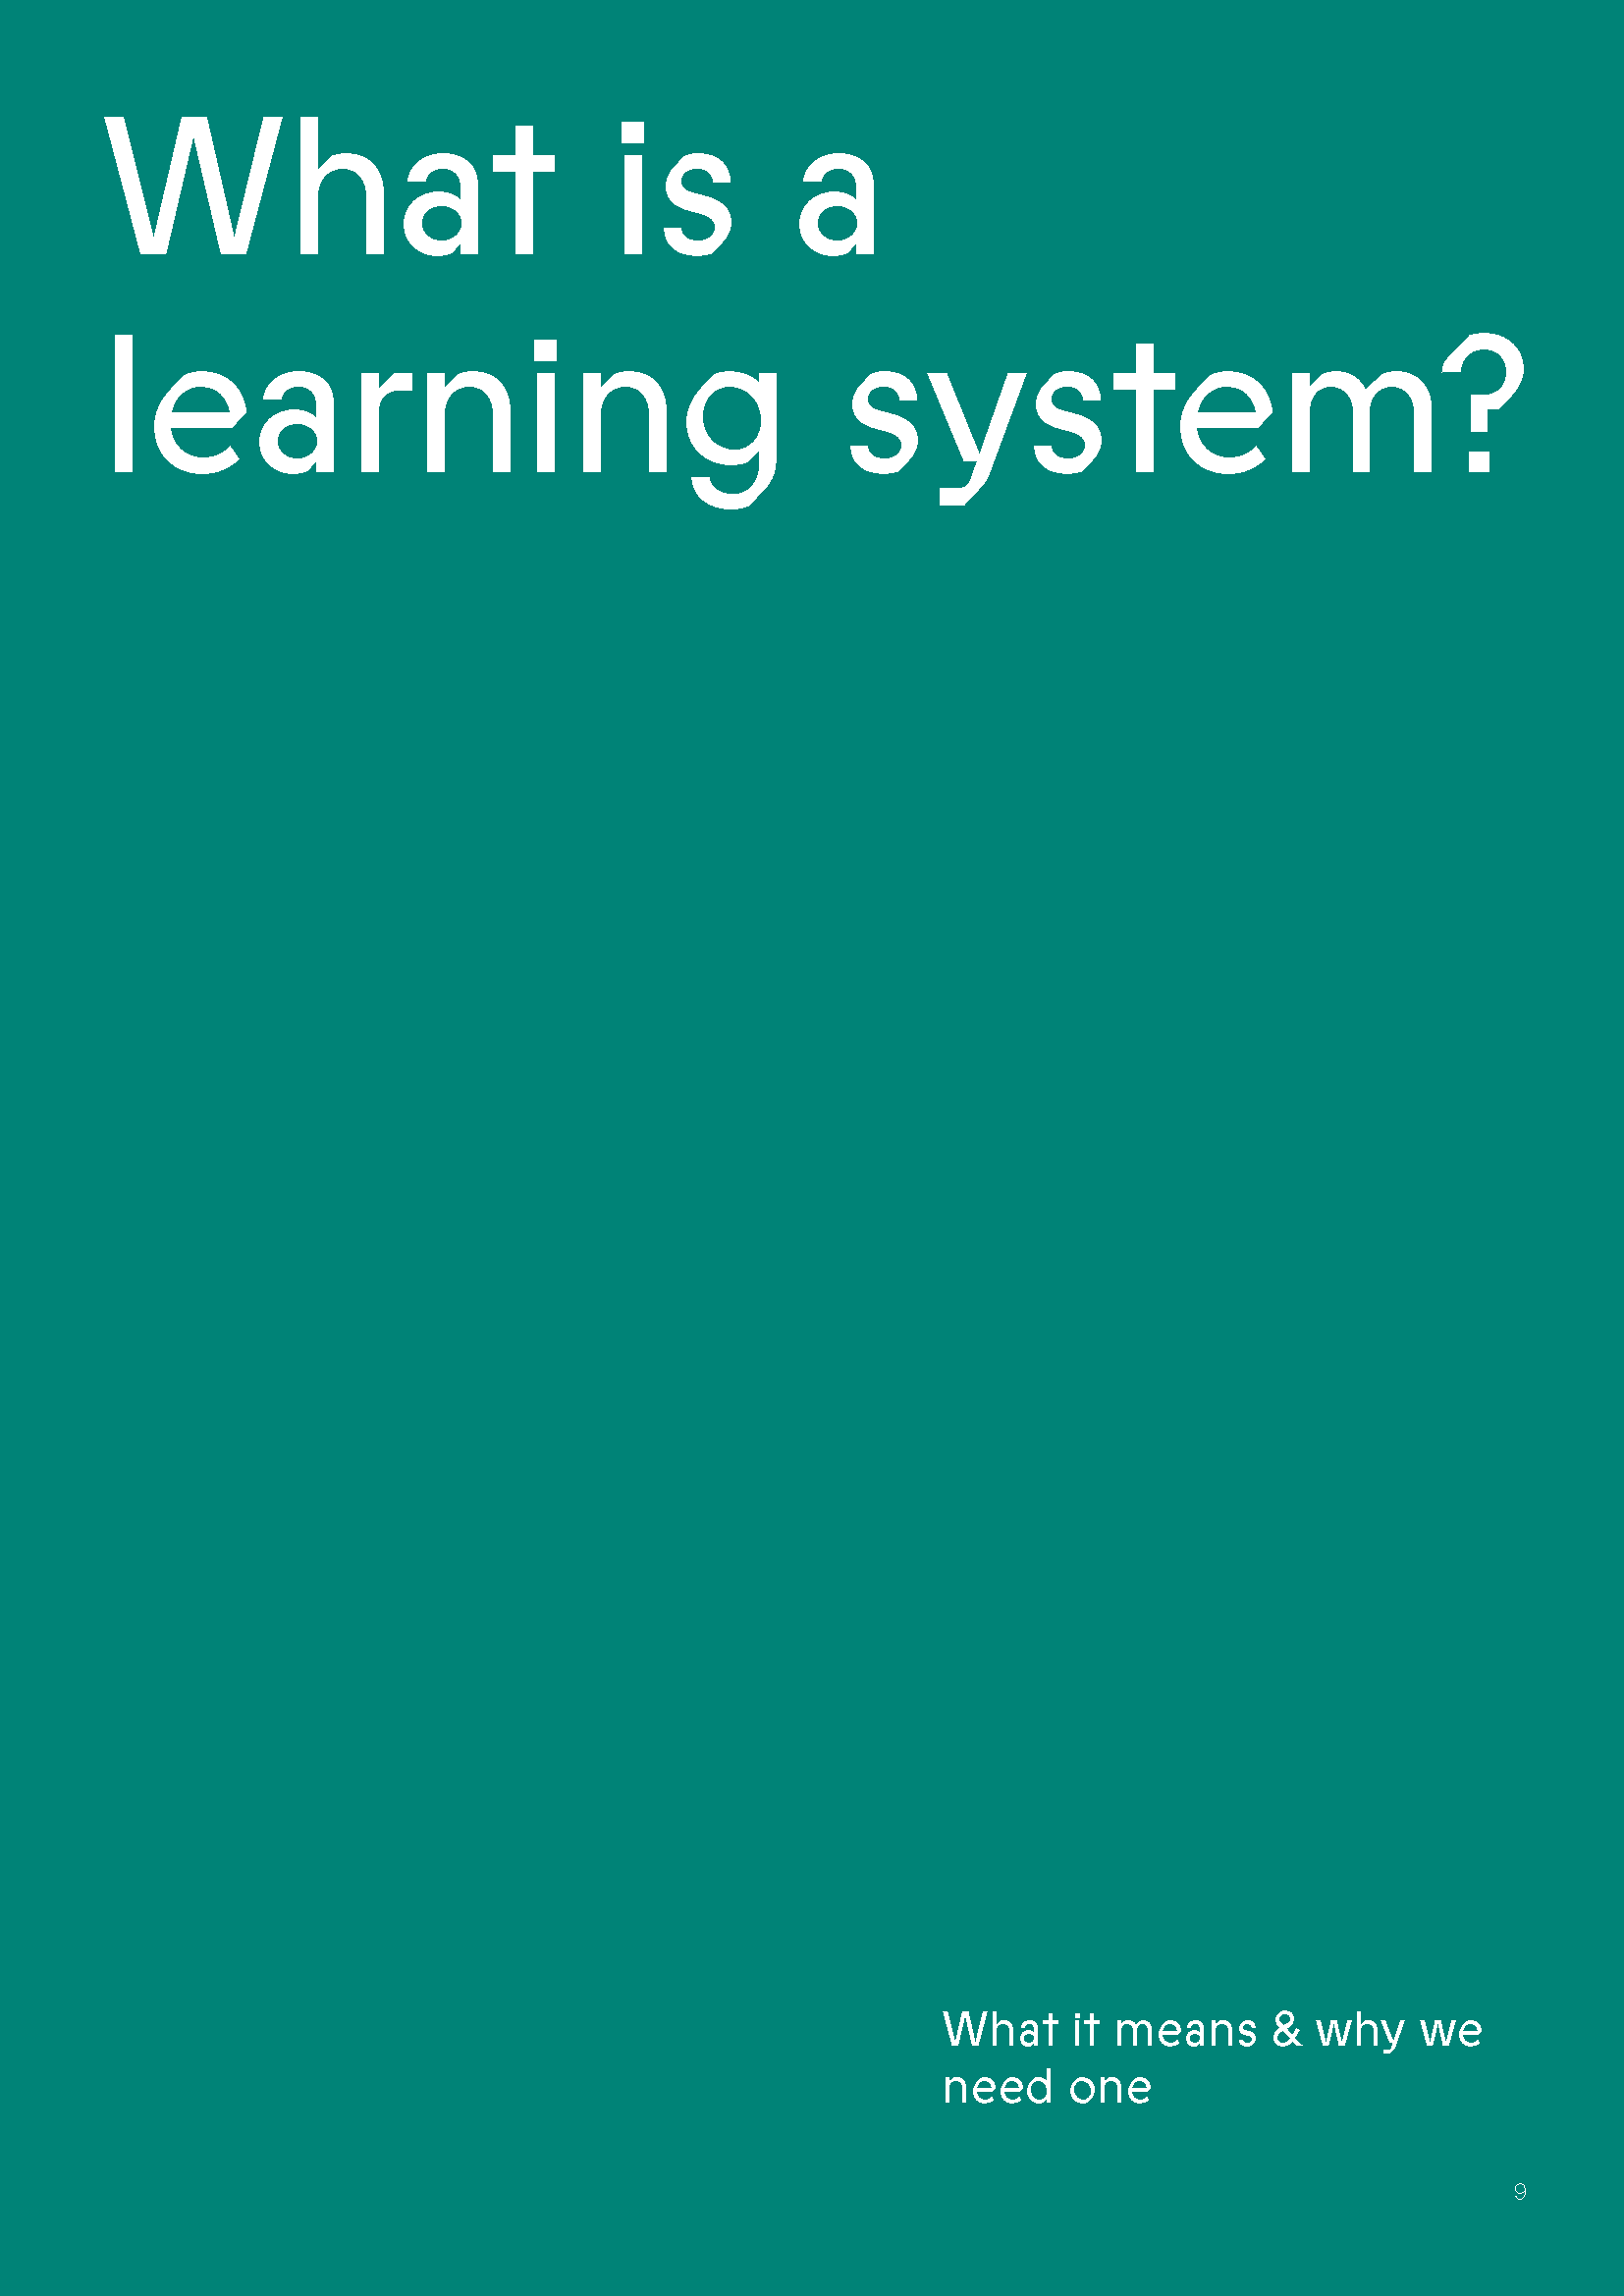 A First 1000 Days Learning System Nov 23_Page_09.png